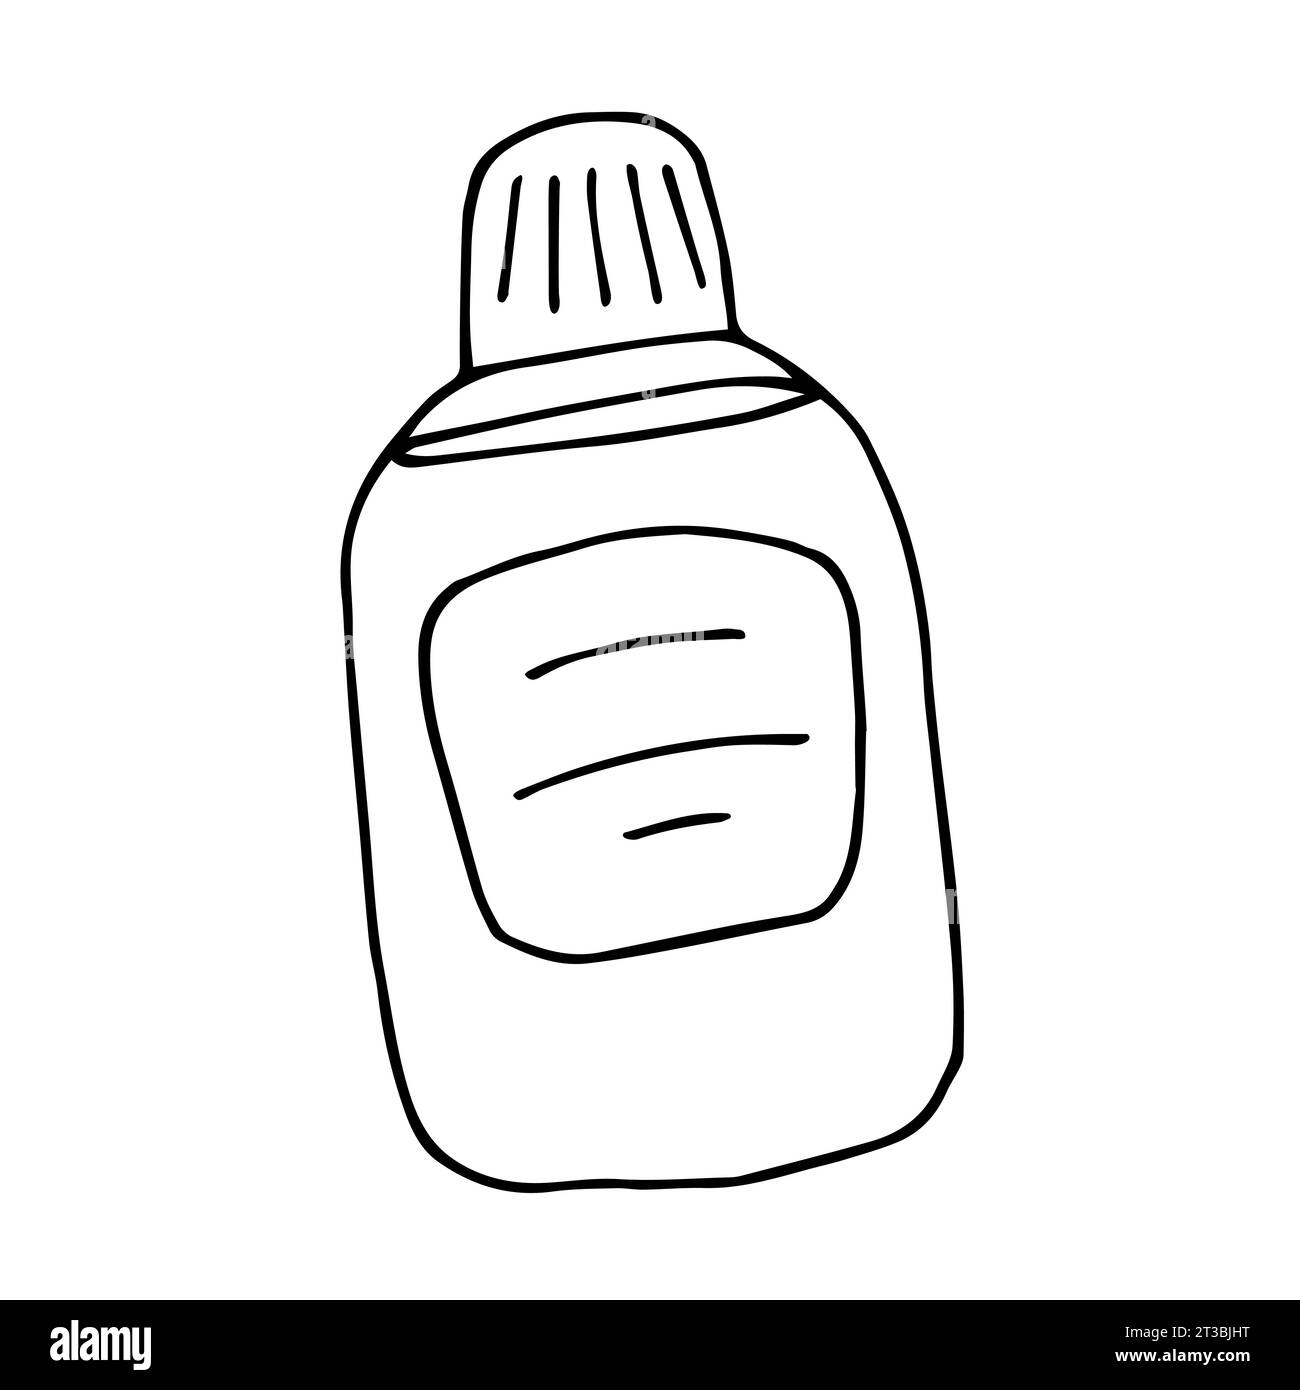 Oral rinse in doodle style. Mouthwash vector illustration isolated on white background Stock Vector